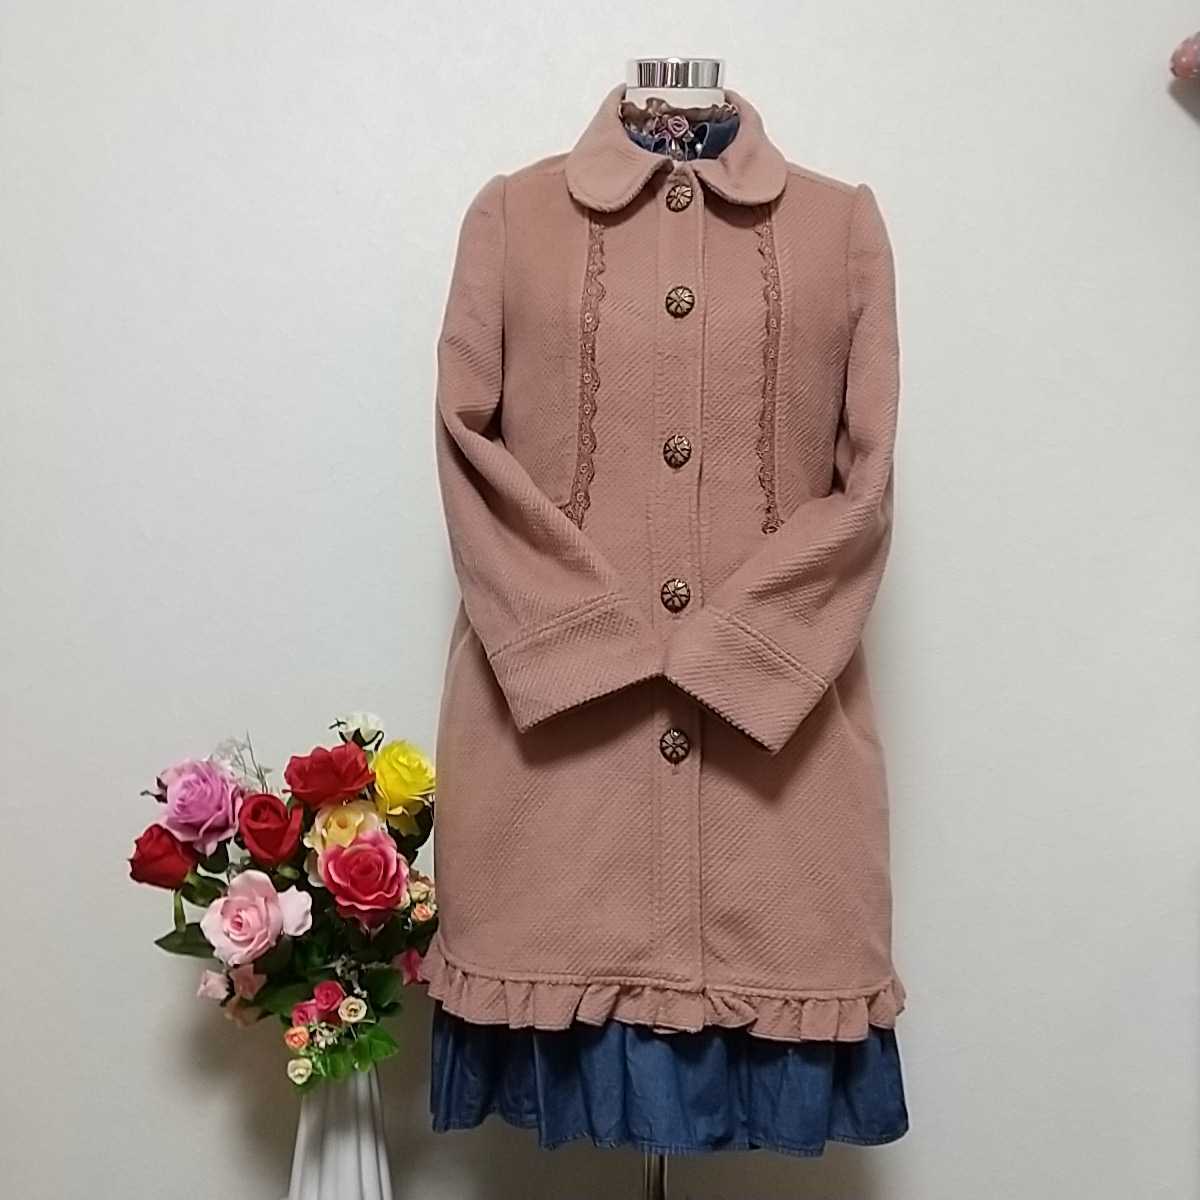 ( new goods )axesfemme autumn winter thing taking before others price! decoration button race decoration hem frill settled pink. . elegant semi-long coat size M**